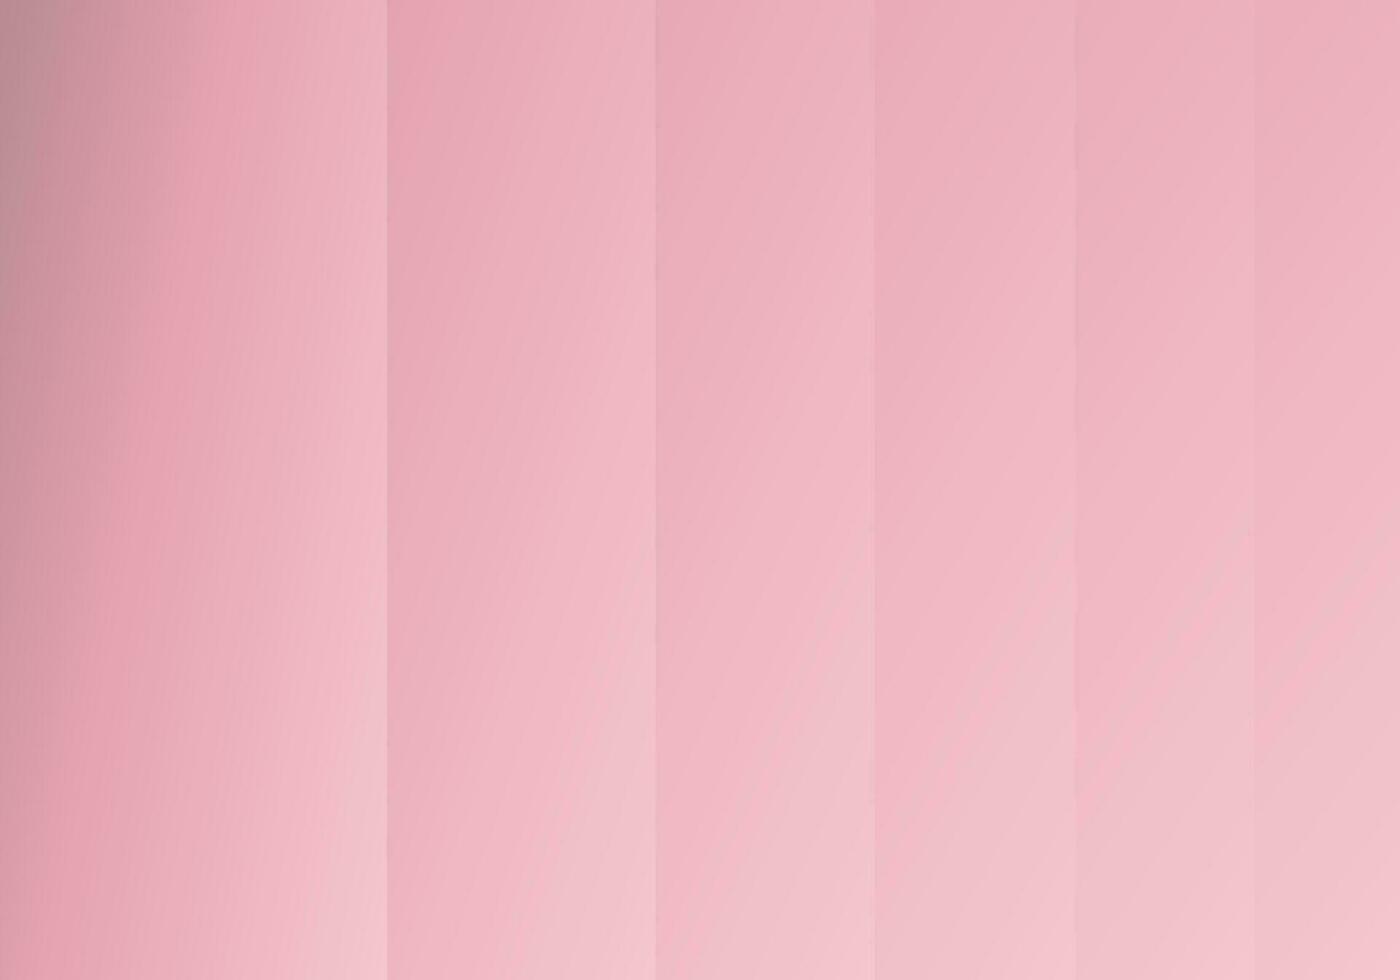 Soft pink background with srtipes effect vector